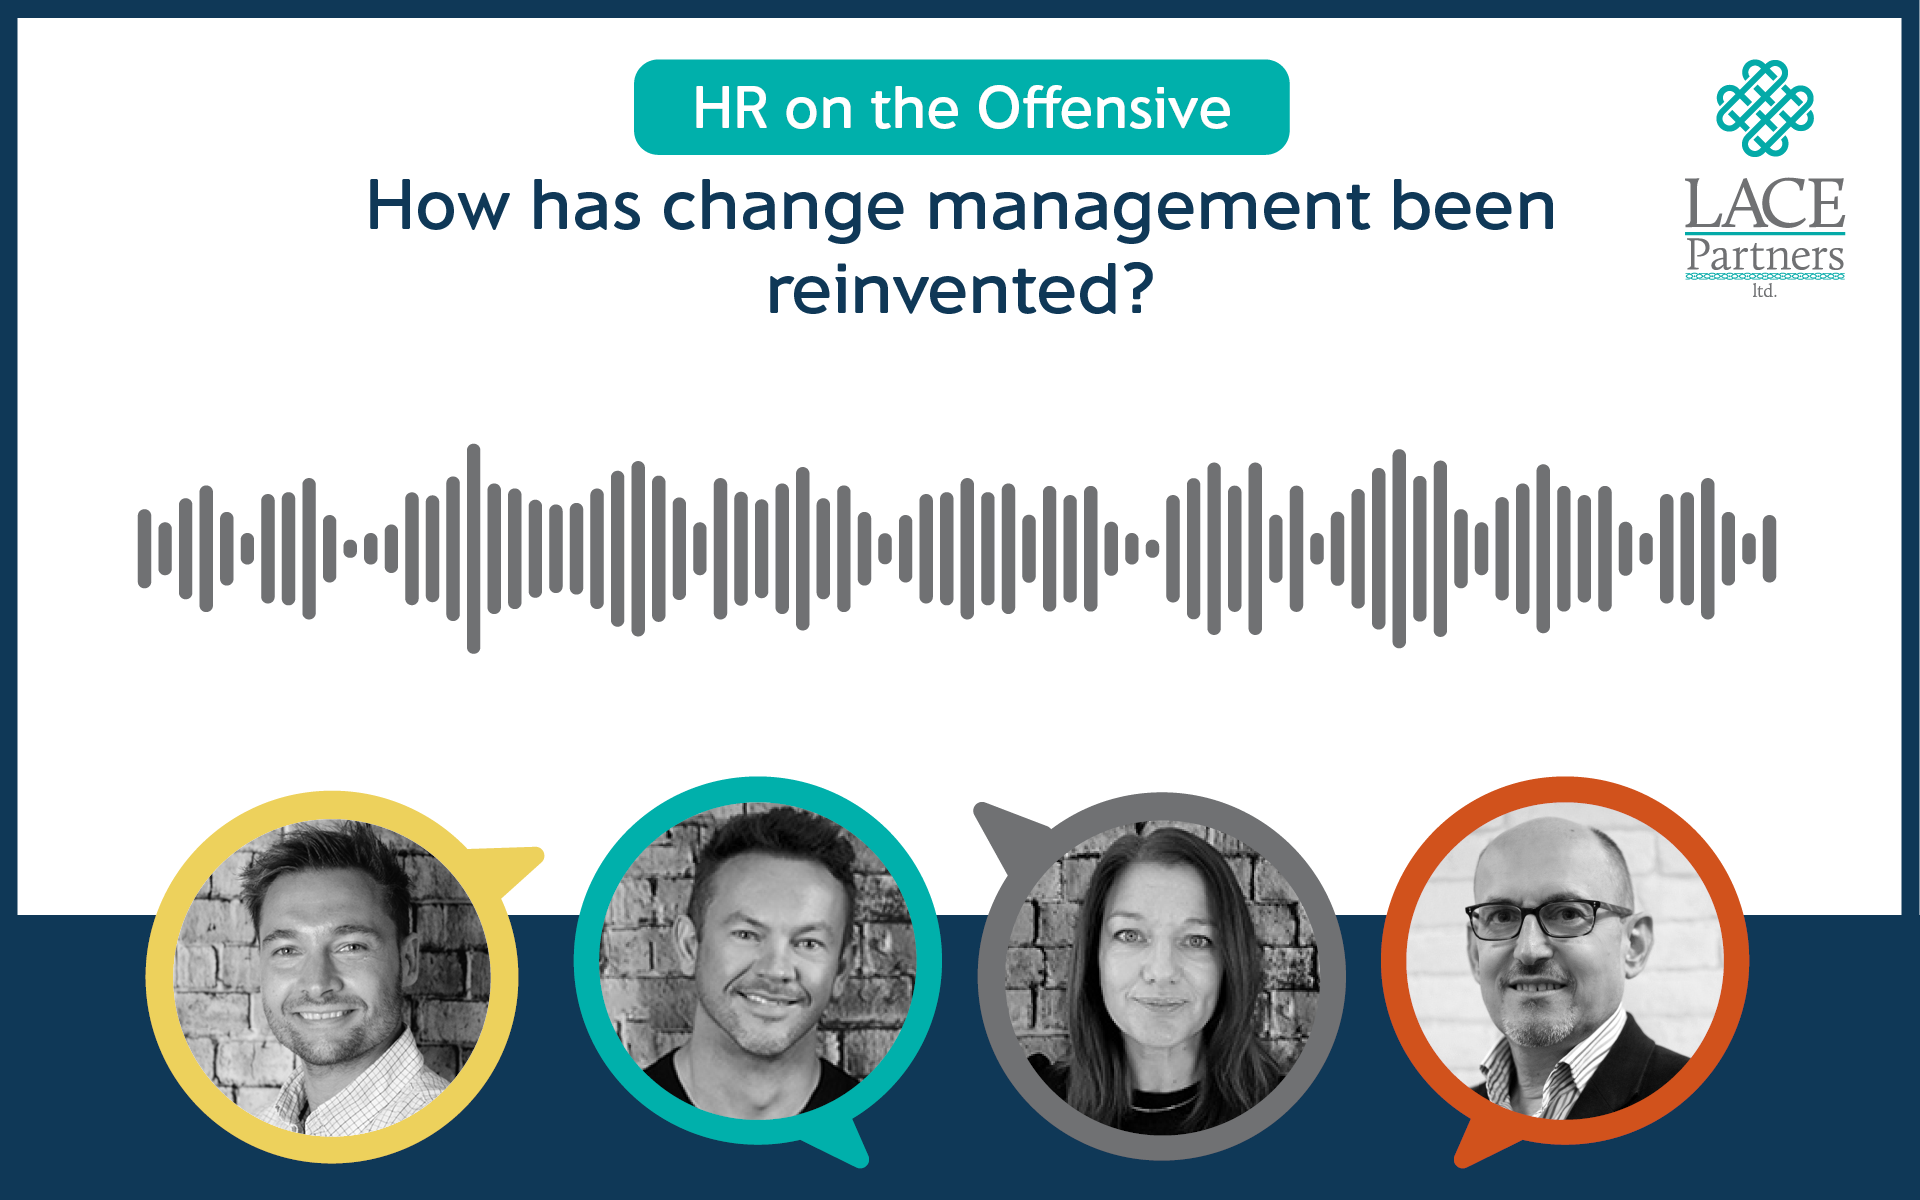 How has change management been reinvented? - LACE Partners